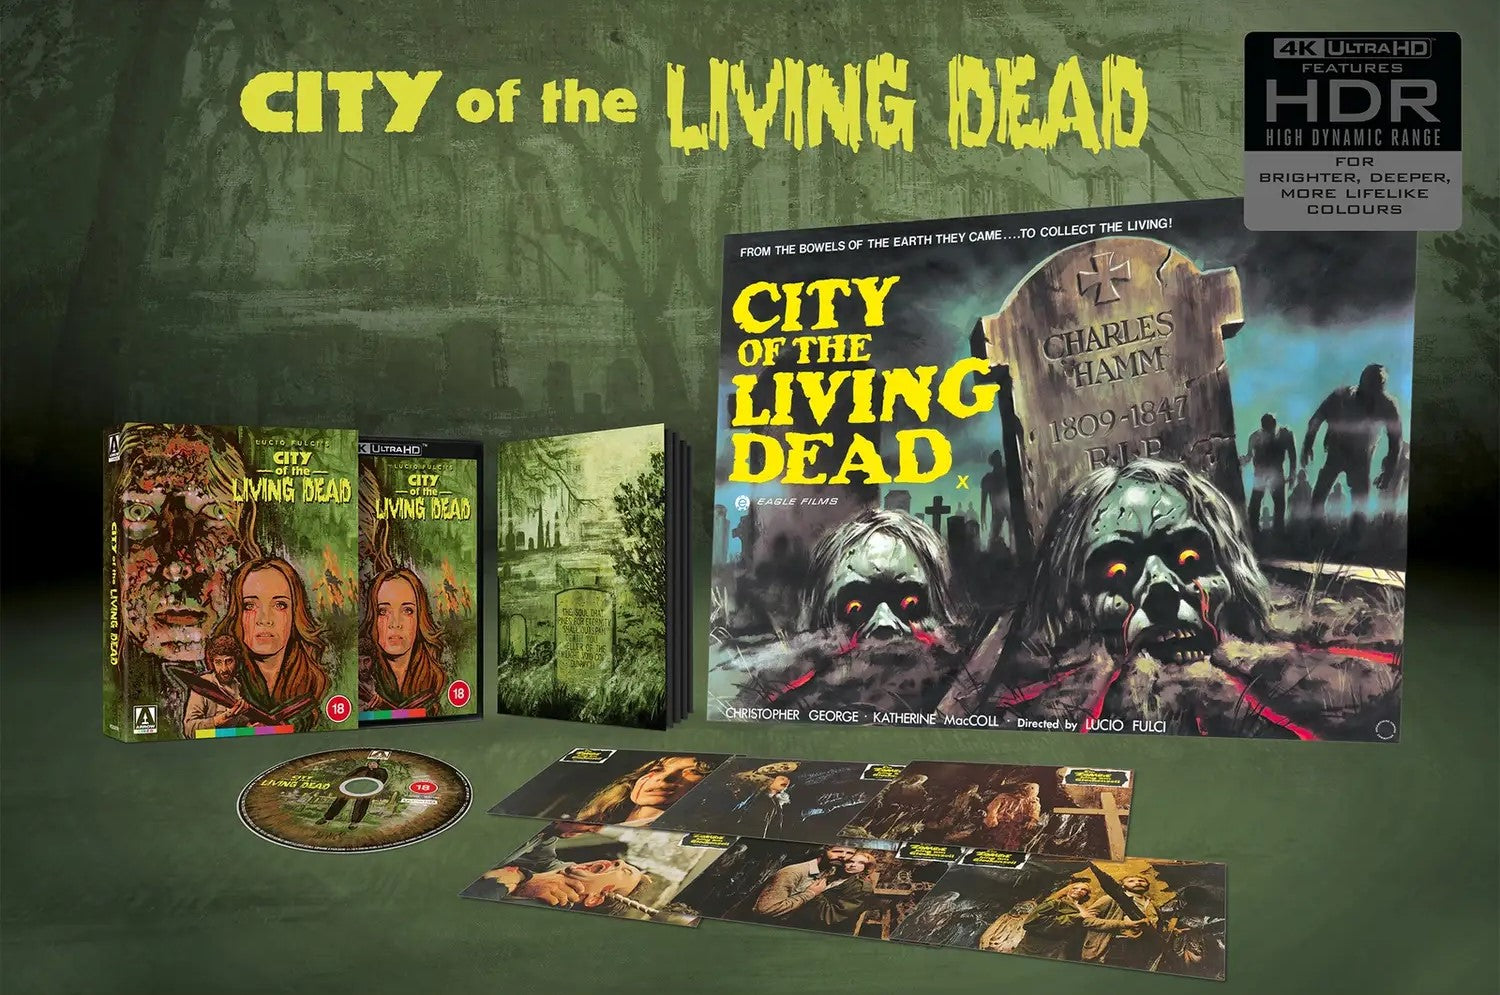 CITY OF THE LIVING DEAD (LIMITED EDITION) 4K UHD